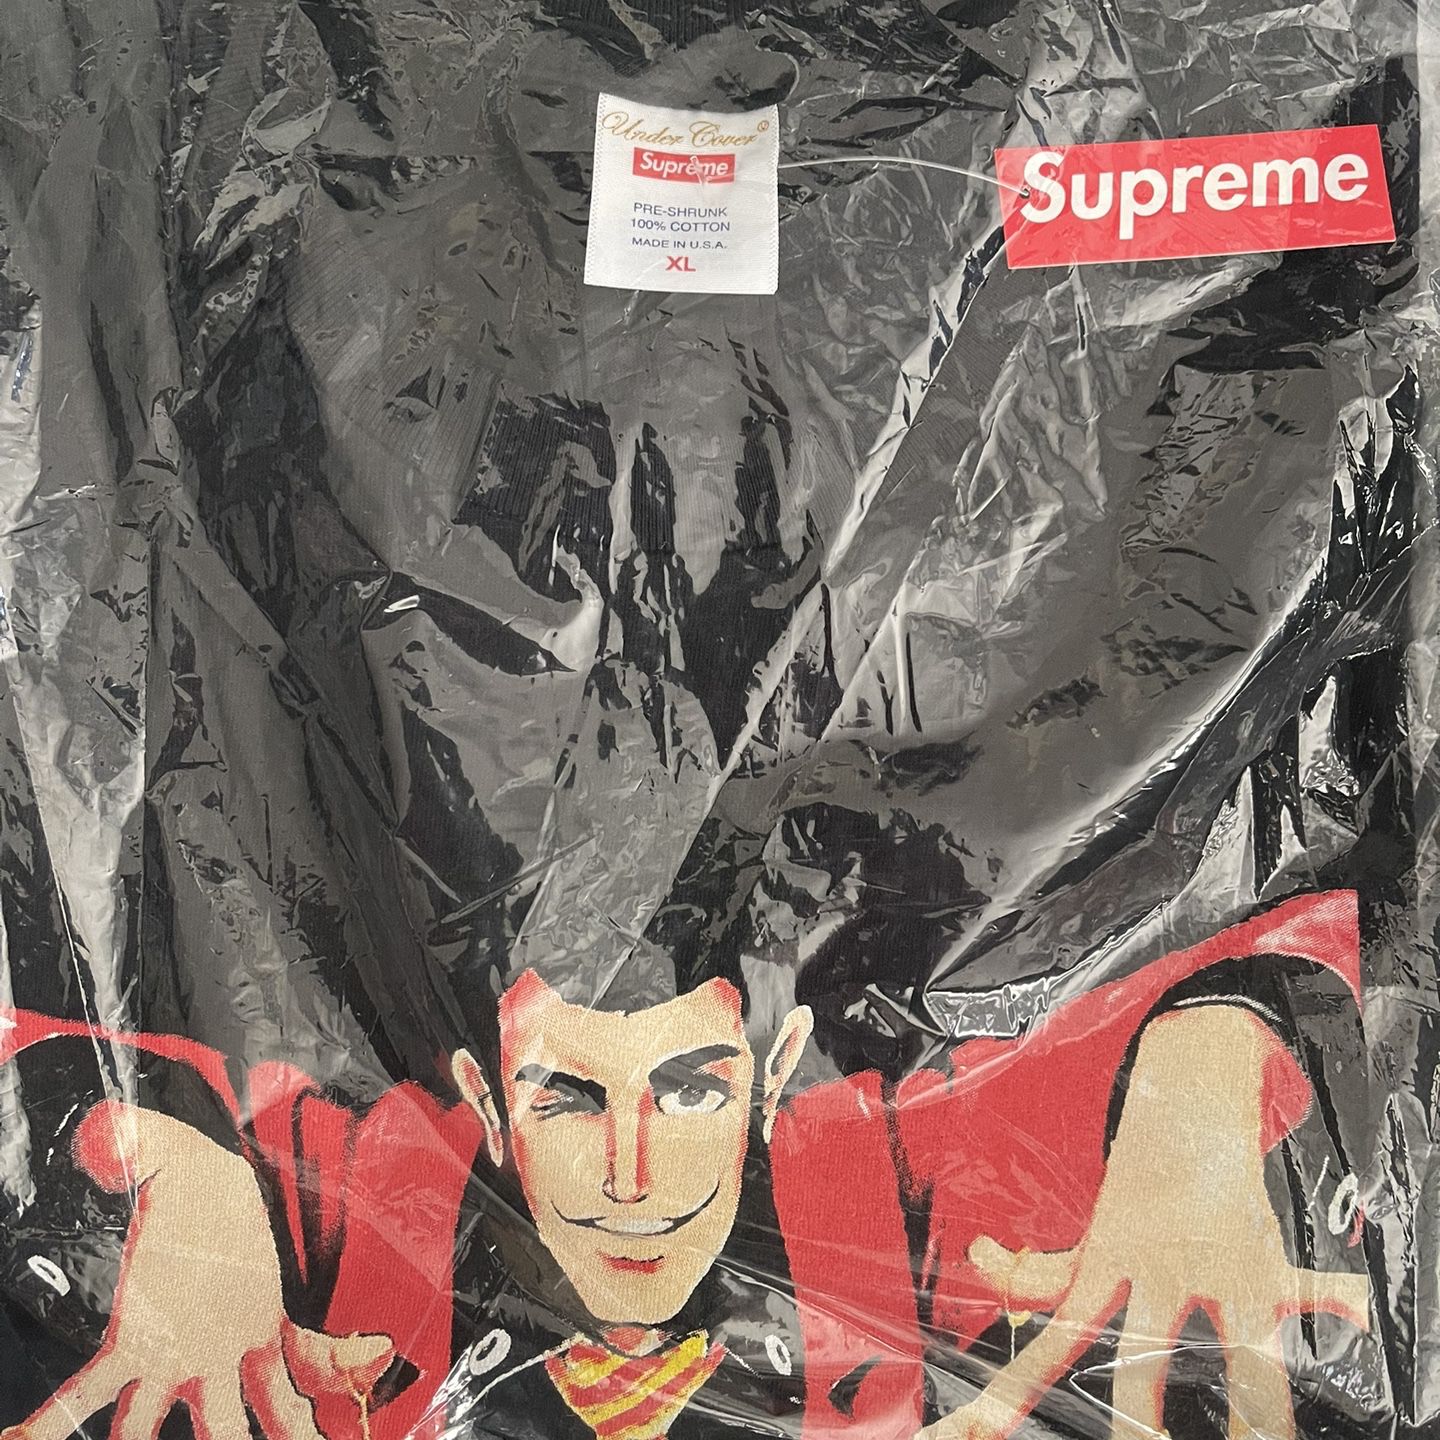 NWT Supreme Undercover Lupin Tee Xl Black for Sale in Livermore